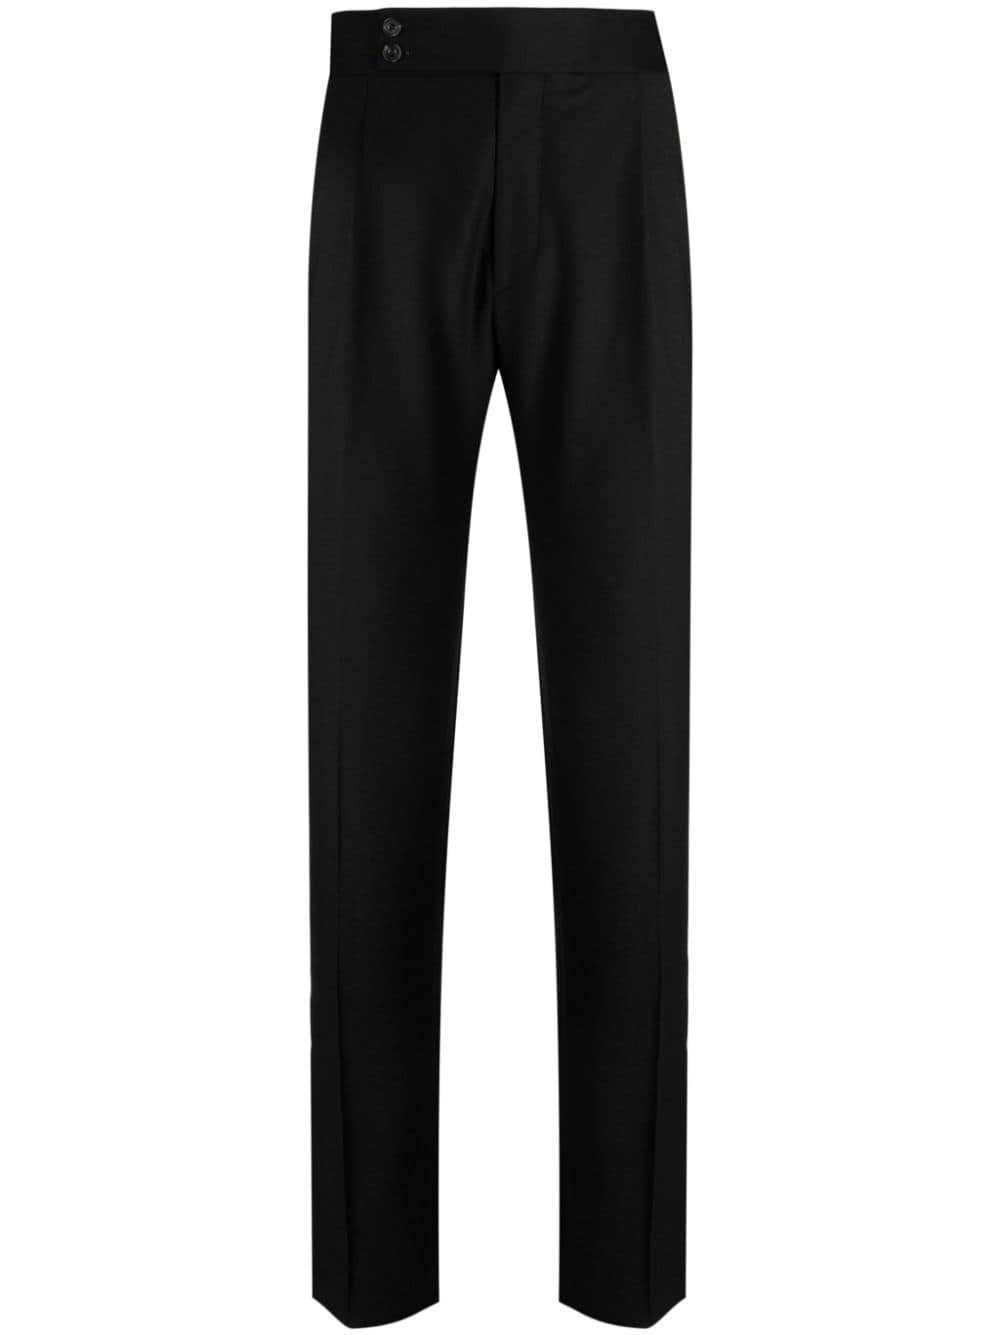 Man On The Boon. High-waist Tailored Trousers In Black